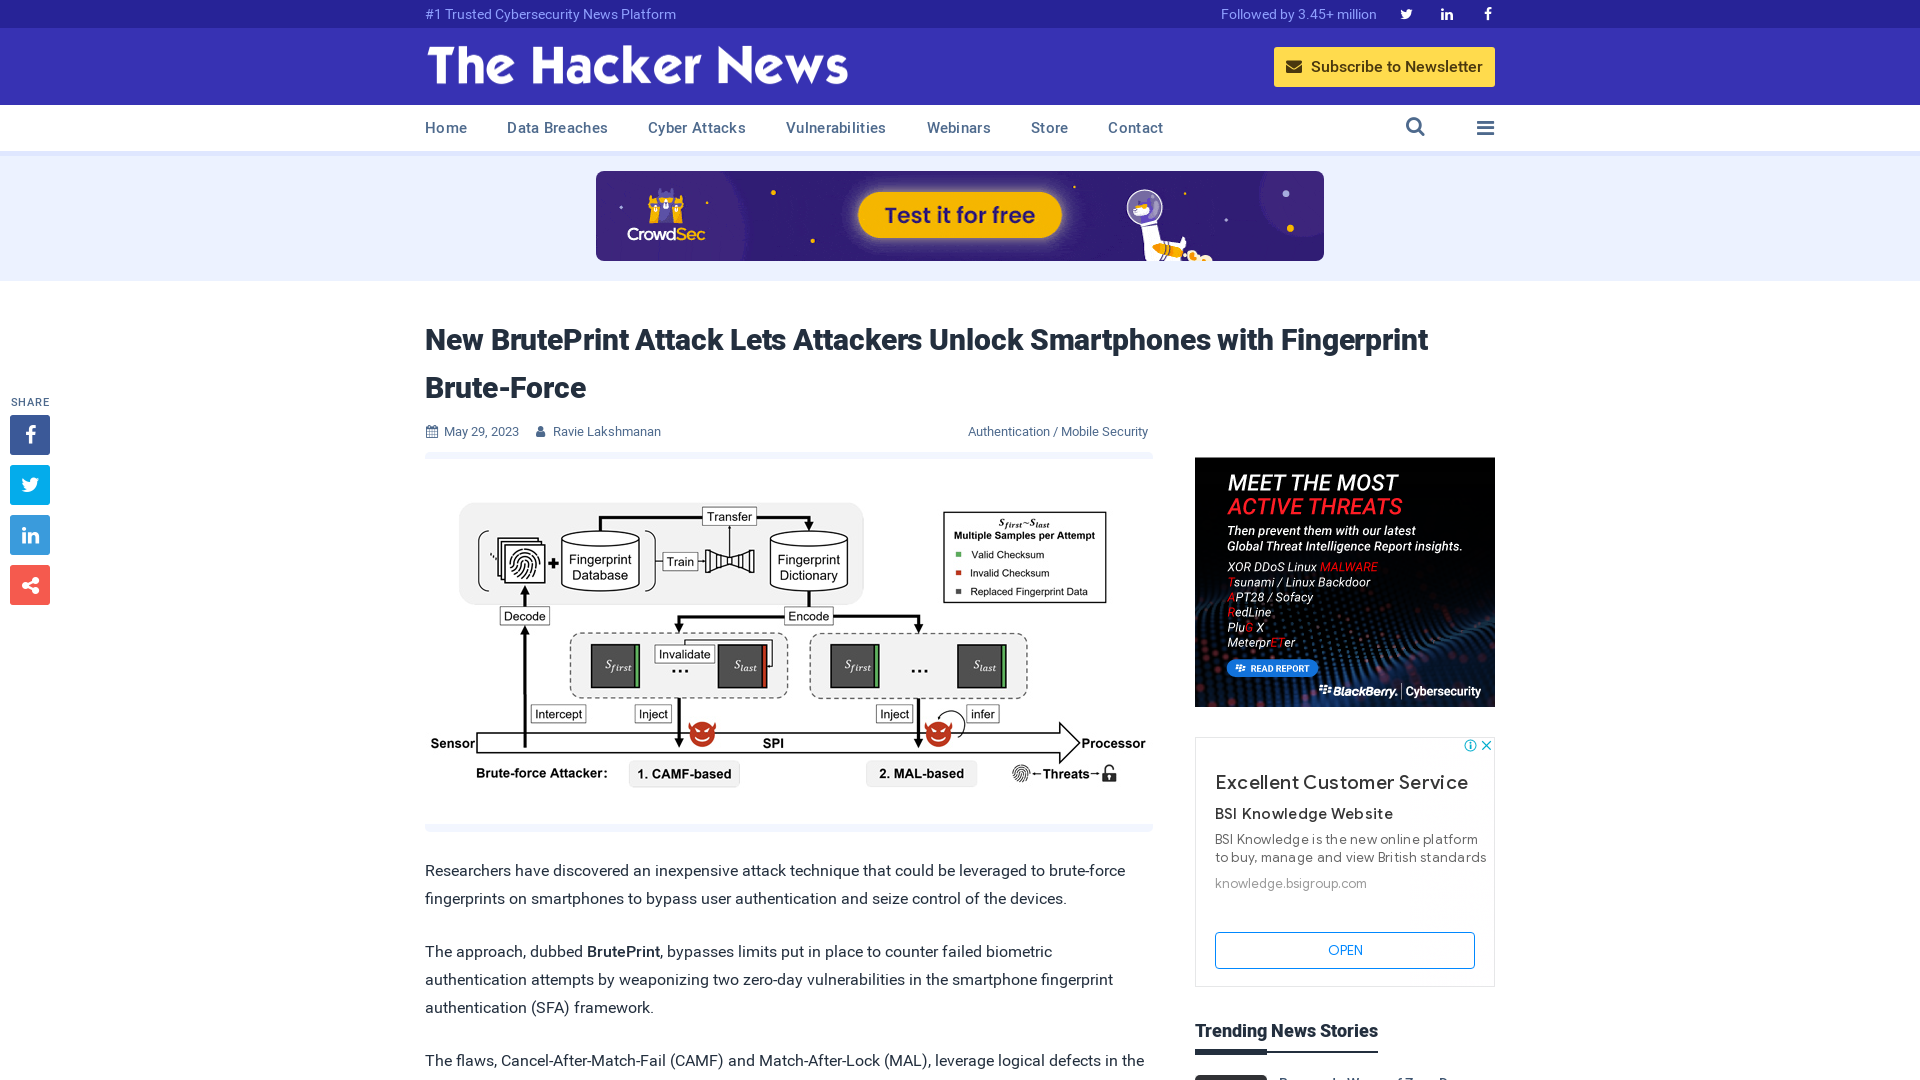 New BrutePrint Attack Lets Attackers Unlock Smartphones with Fingerprint Brute-Force